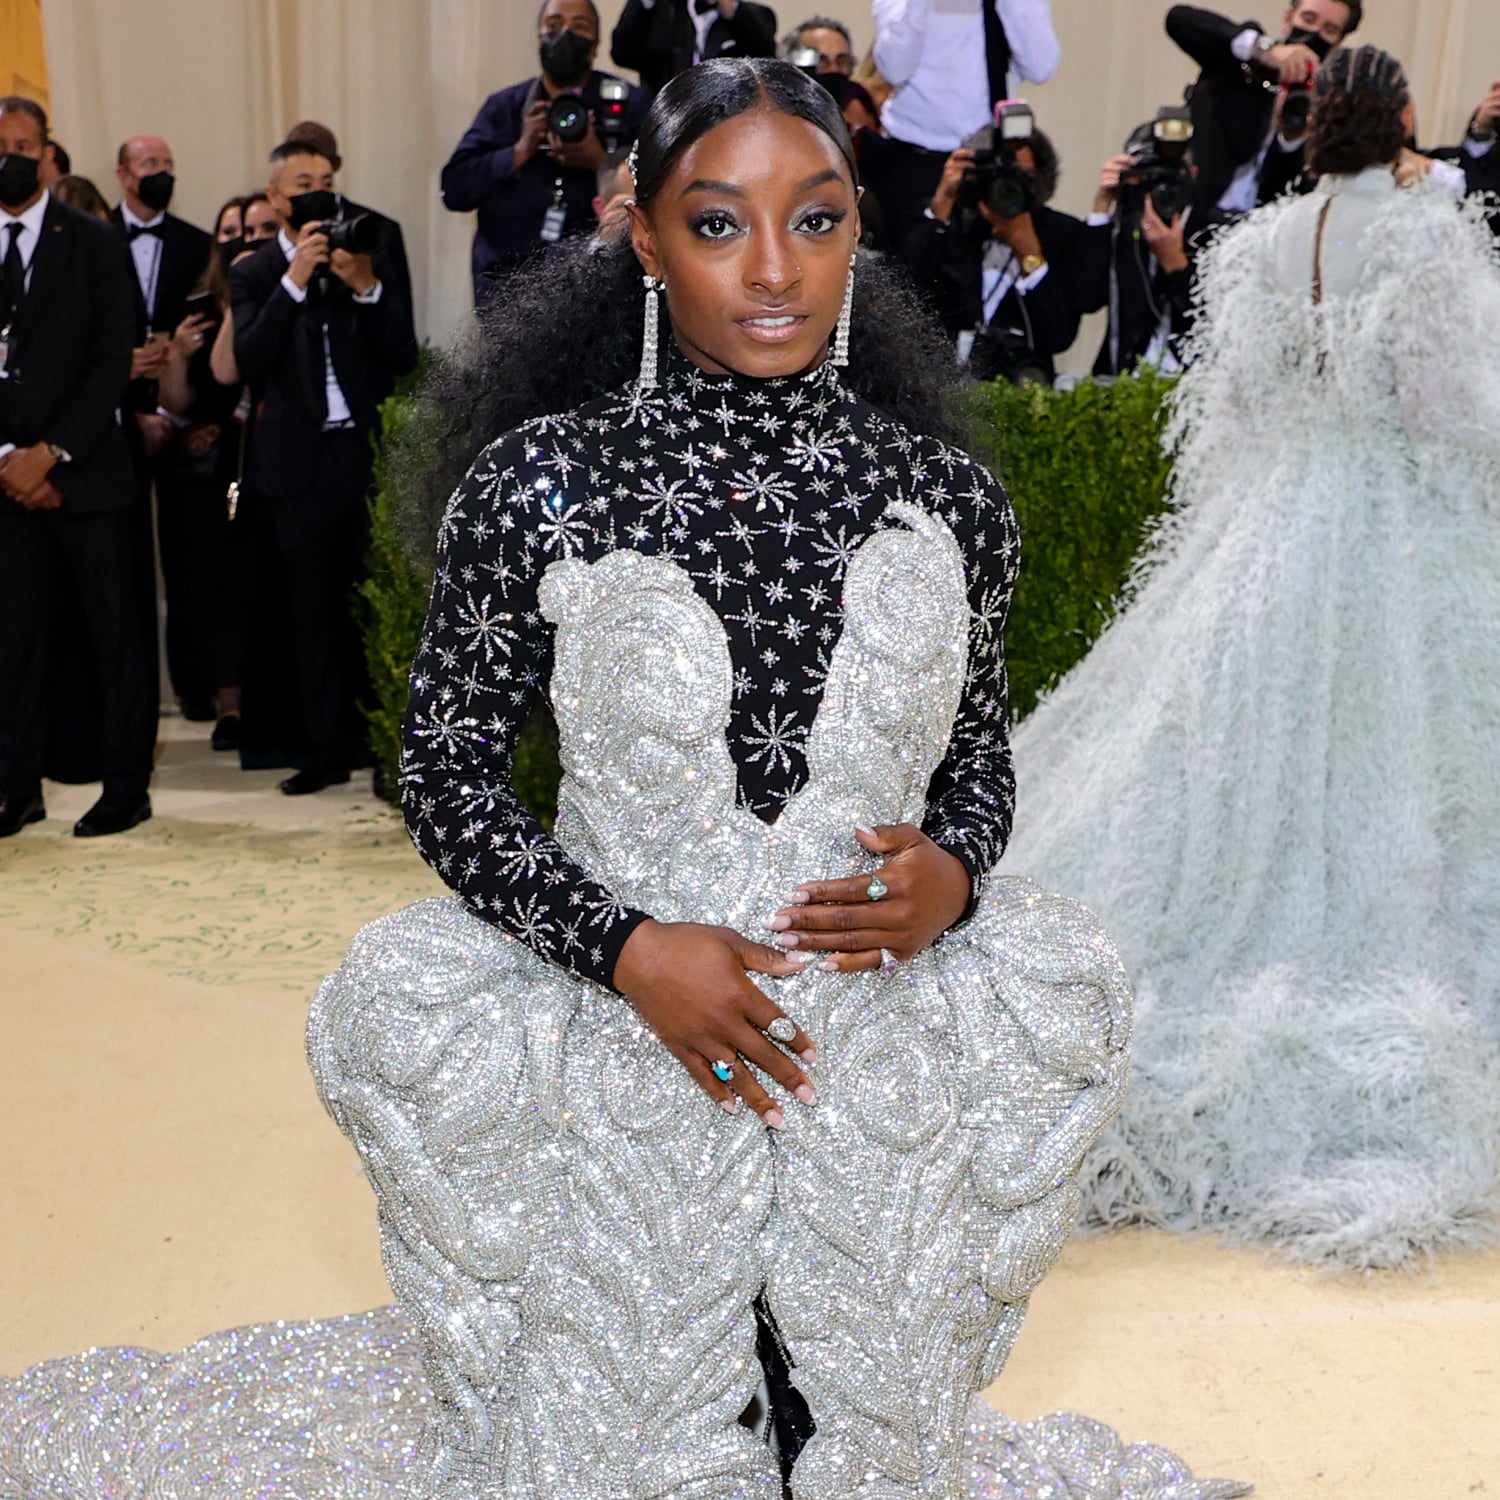 Fans Outraged by Simone Biles’ Specially Designed Met Gala Dress Calling It ‘Flooded Bathtub’ & ‘Mess'